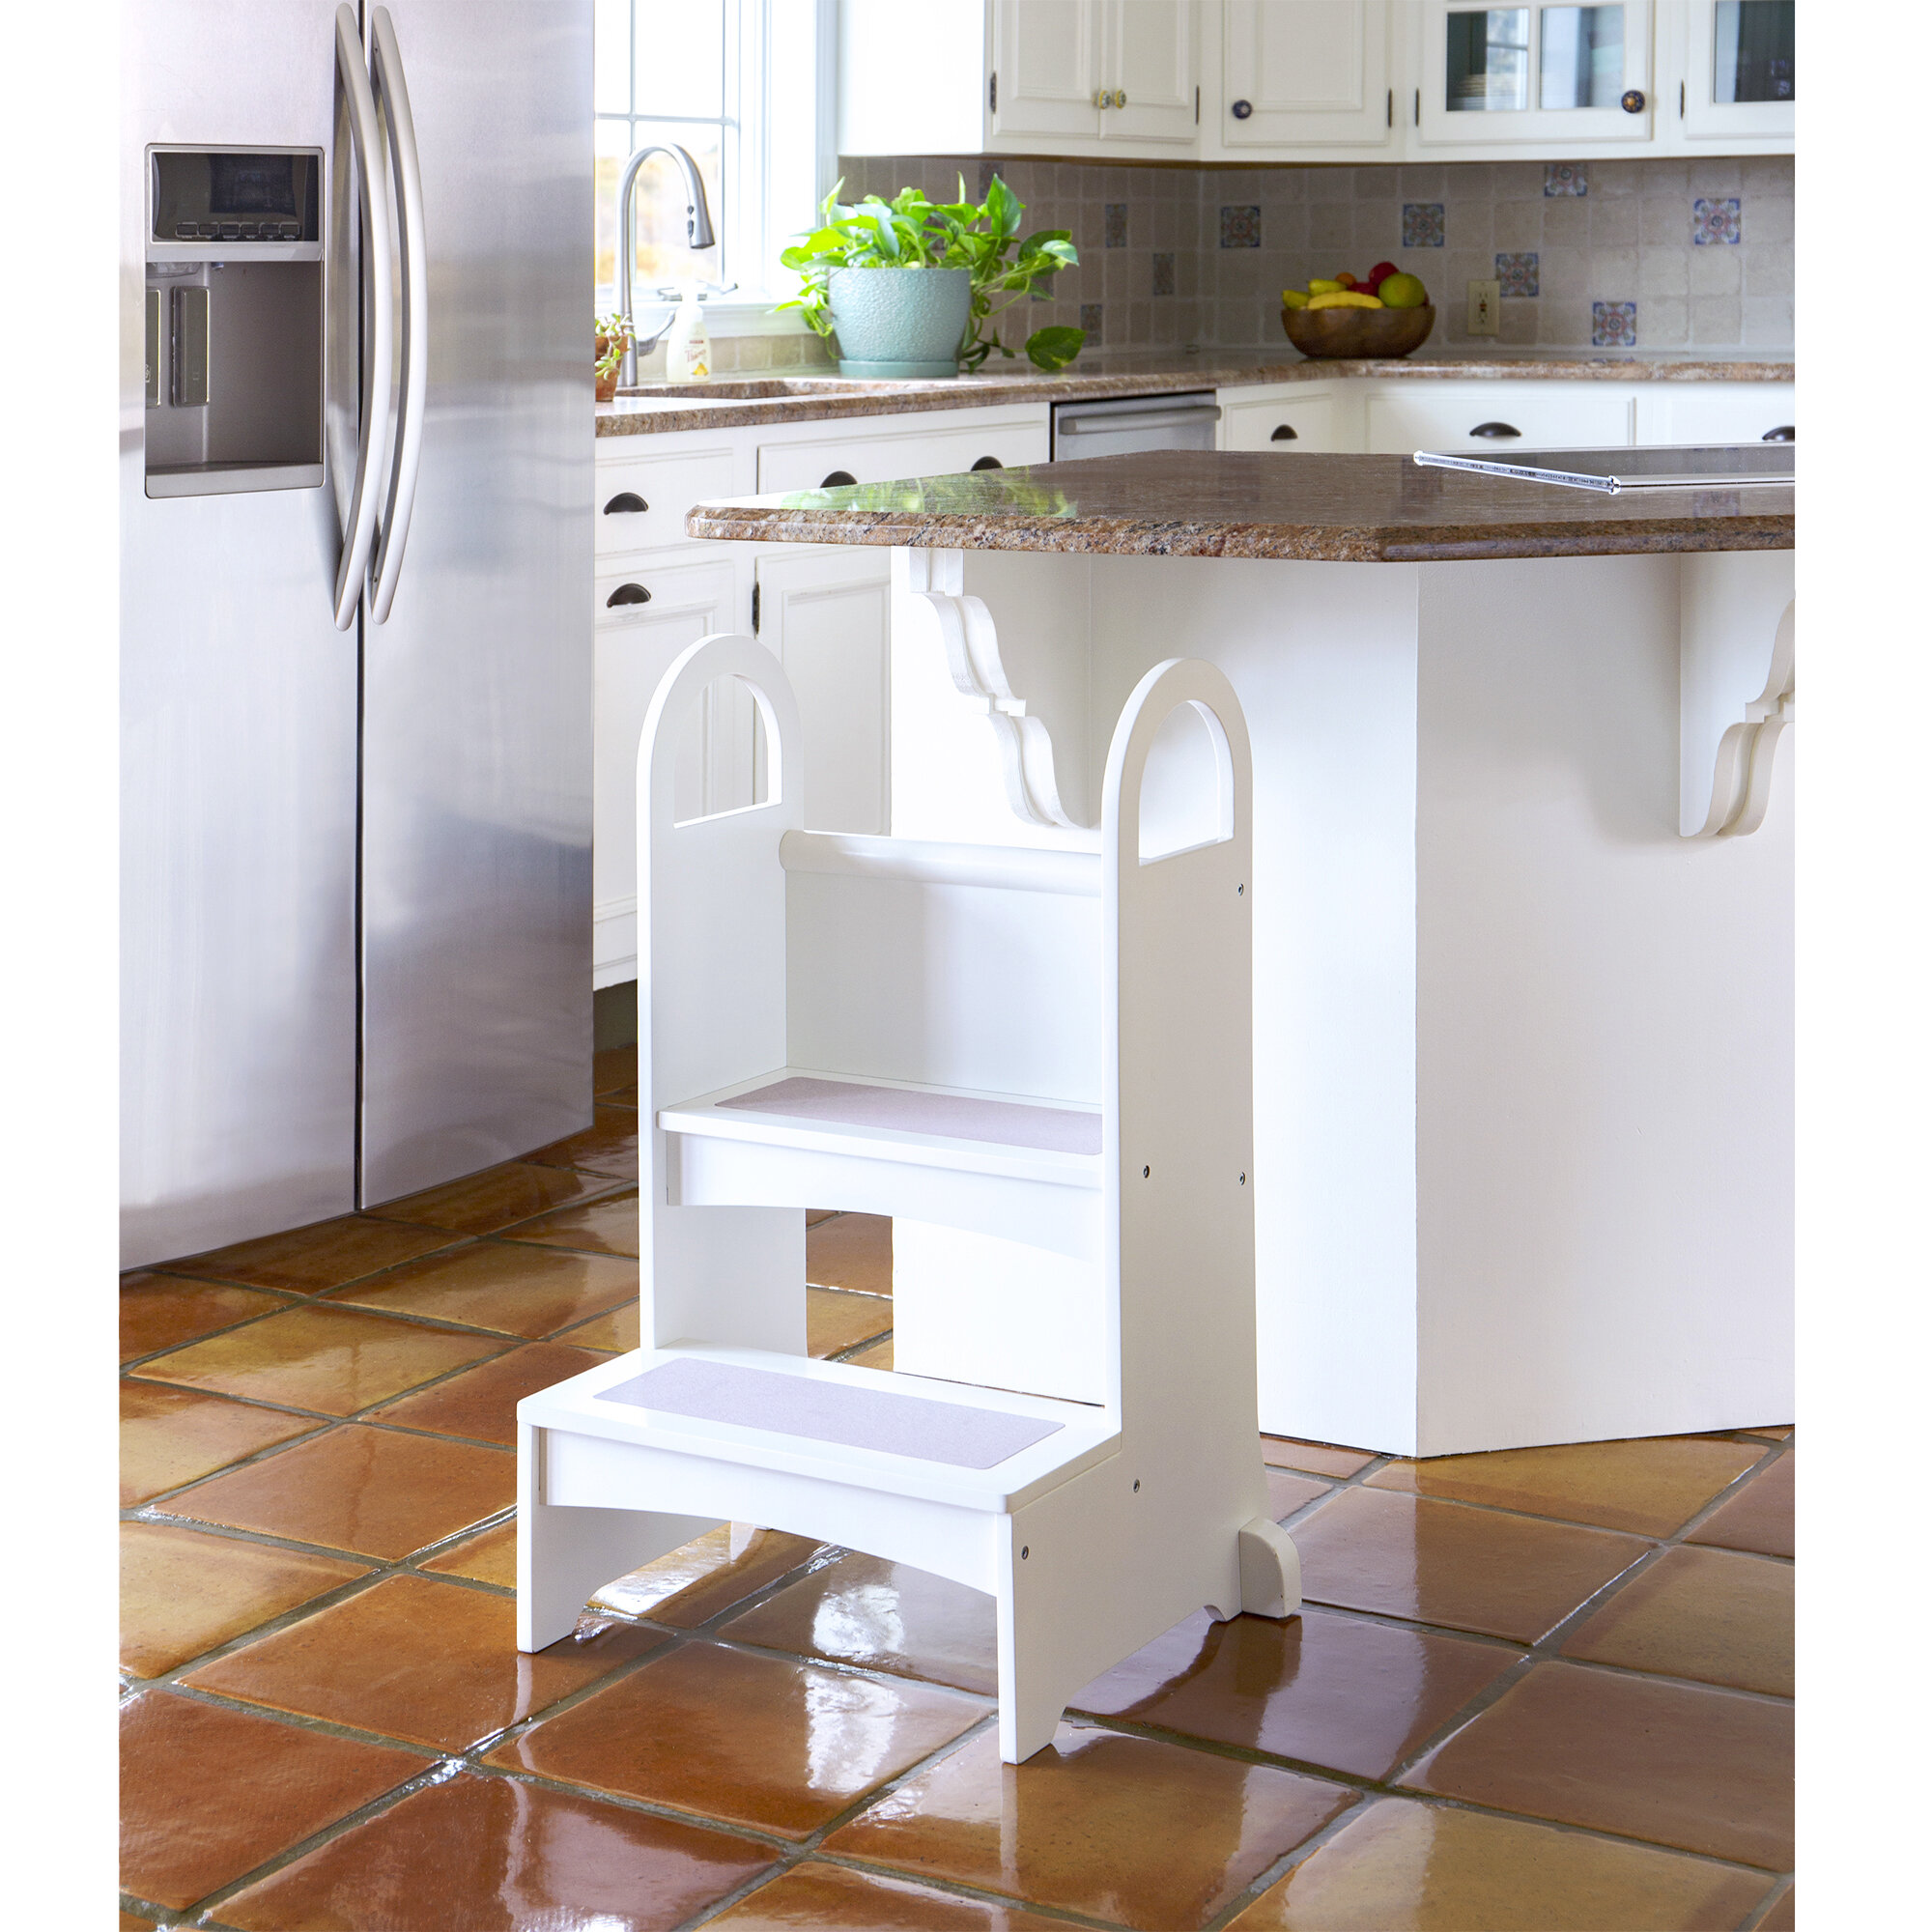 Step Stool Stove Step Stool 42 Inch Step Cooking Stage Kitchen